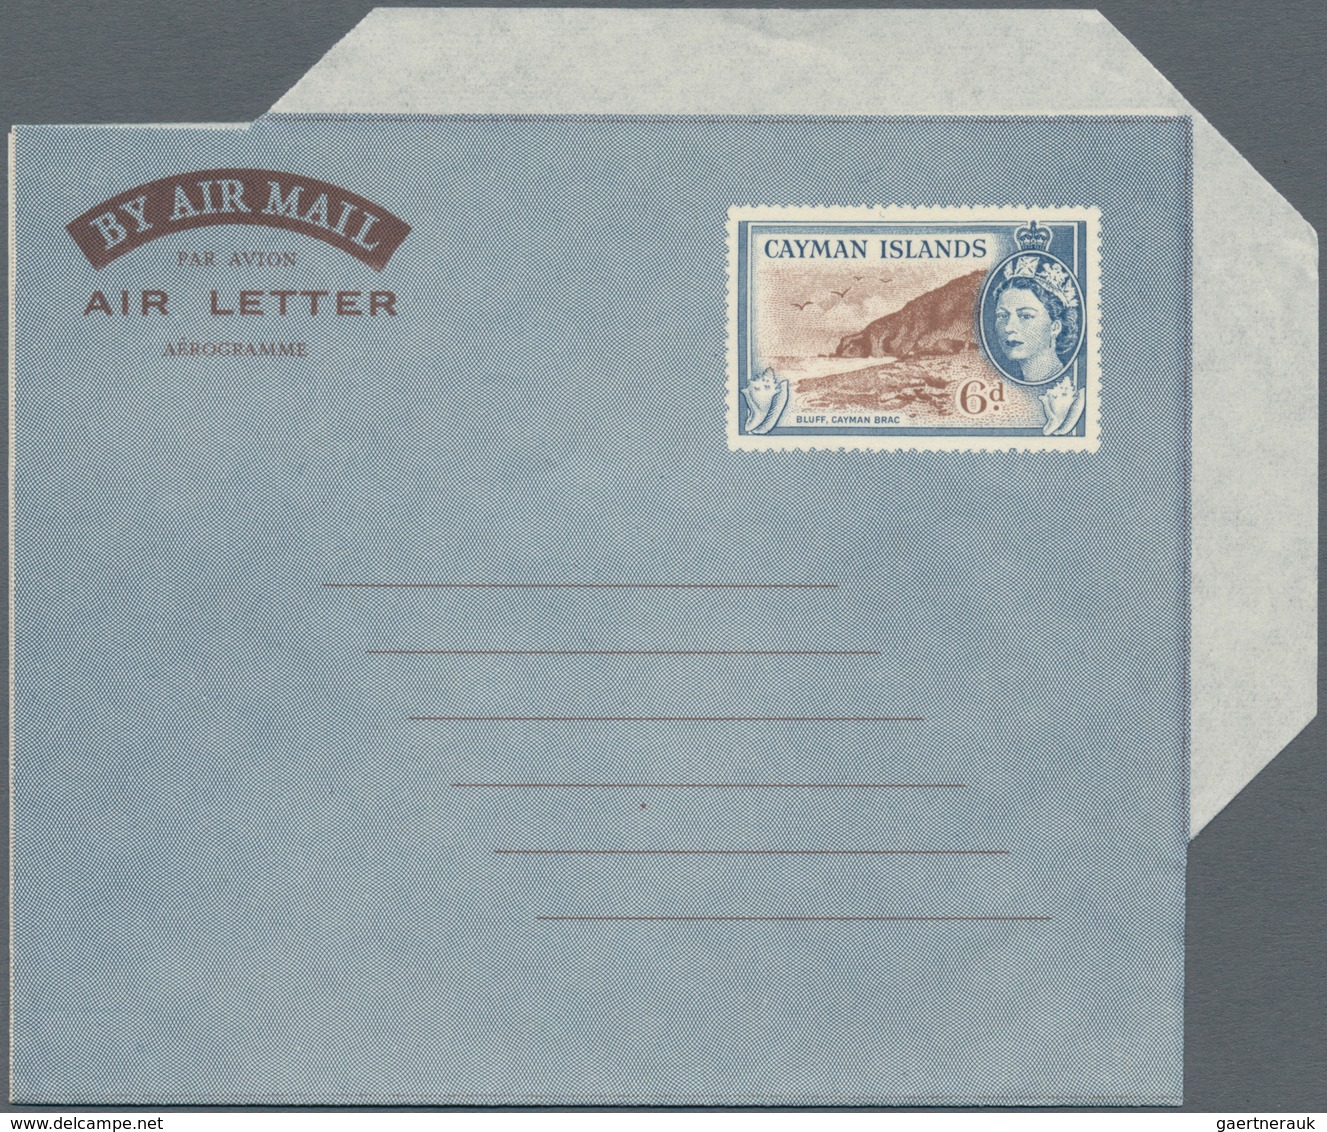 Amerika: More than 2000 Aerogrammes (unfolded, used, CTO) and postal stationery from Canada, Belize,